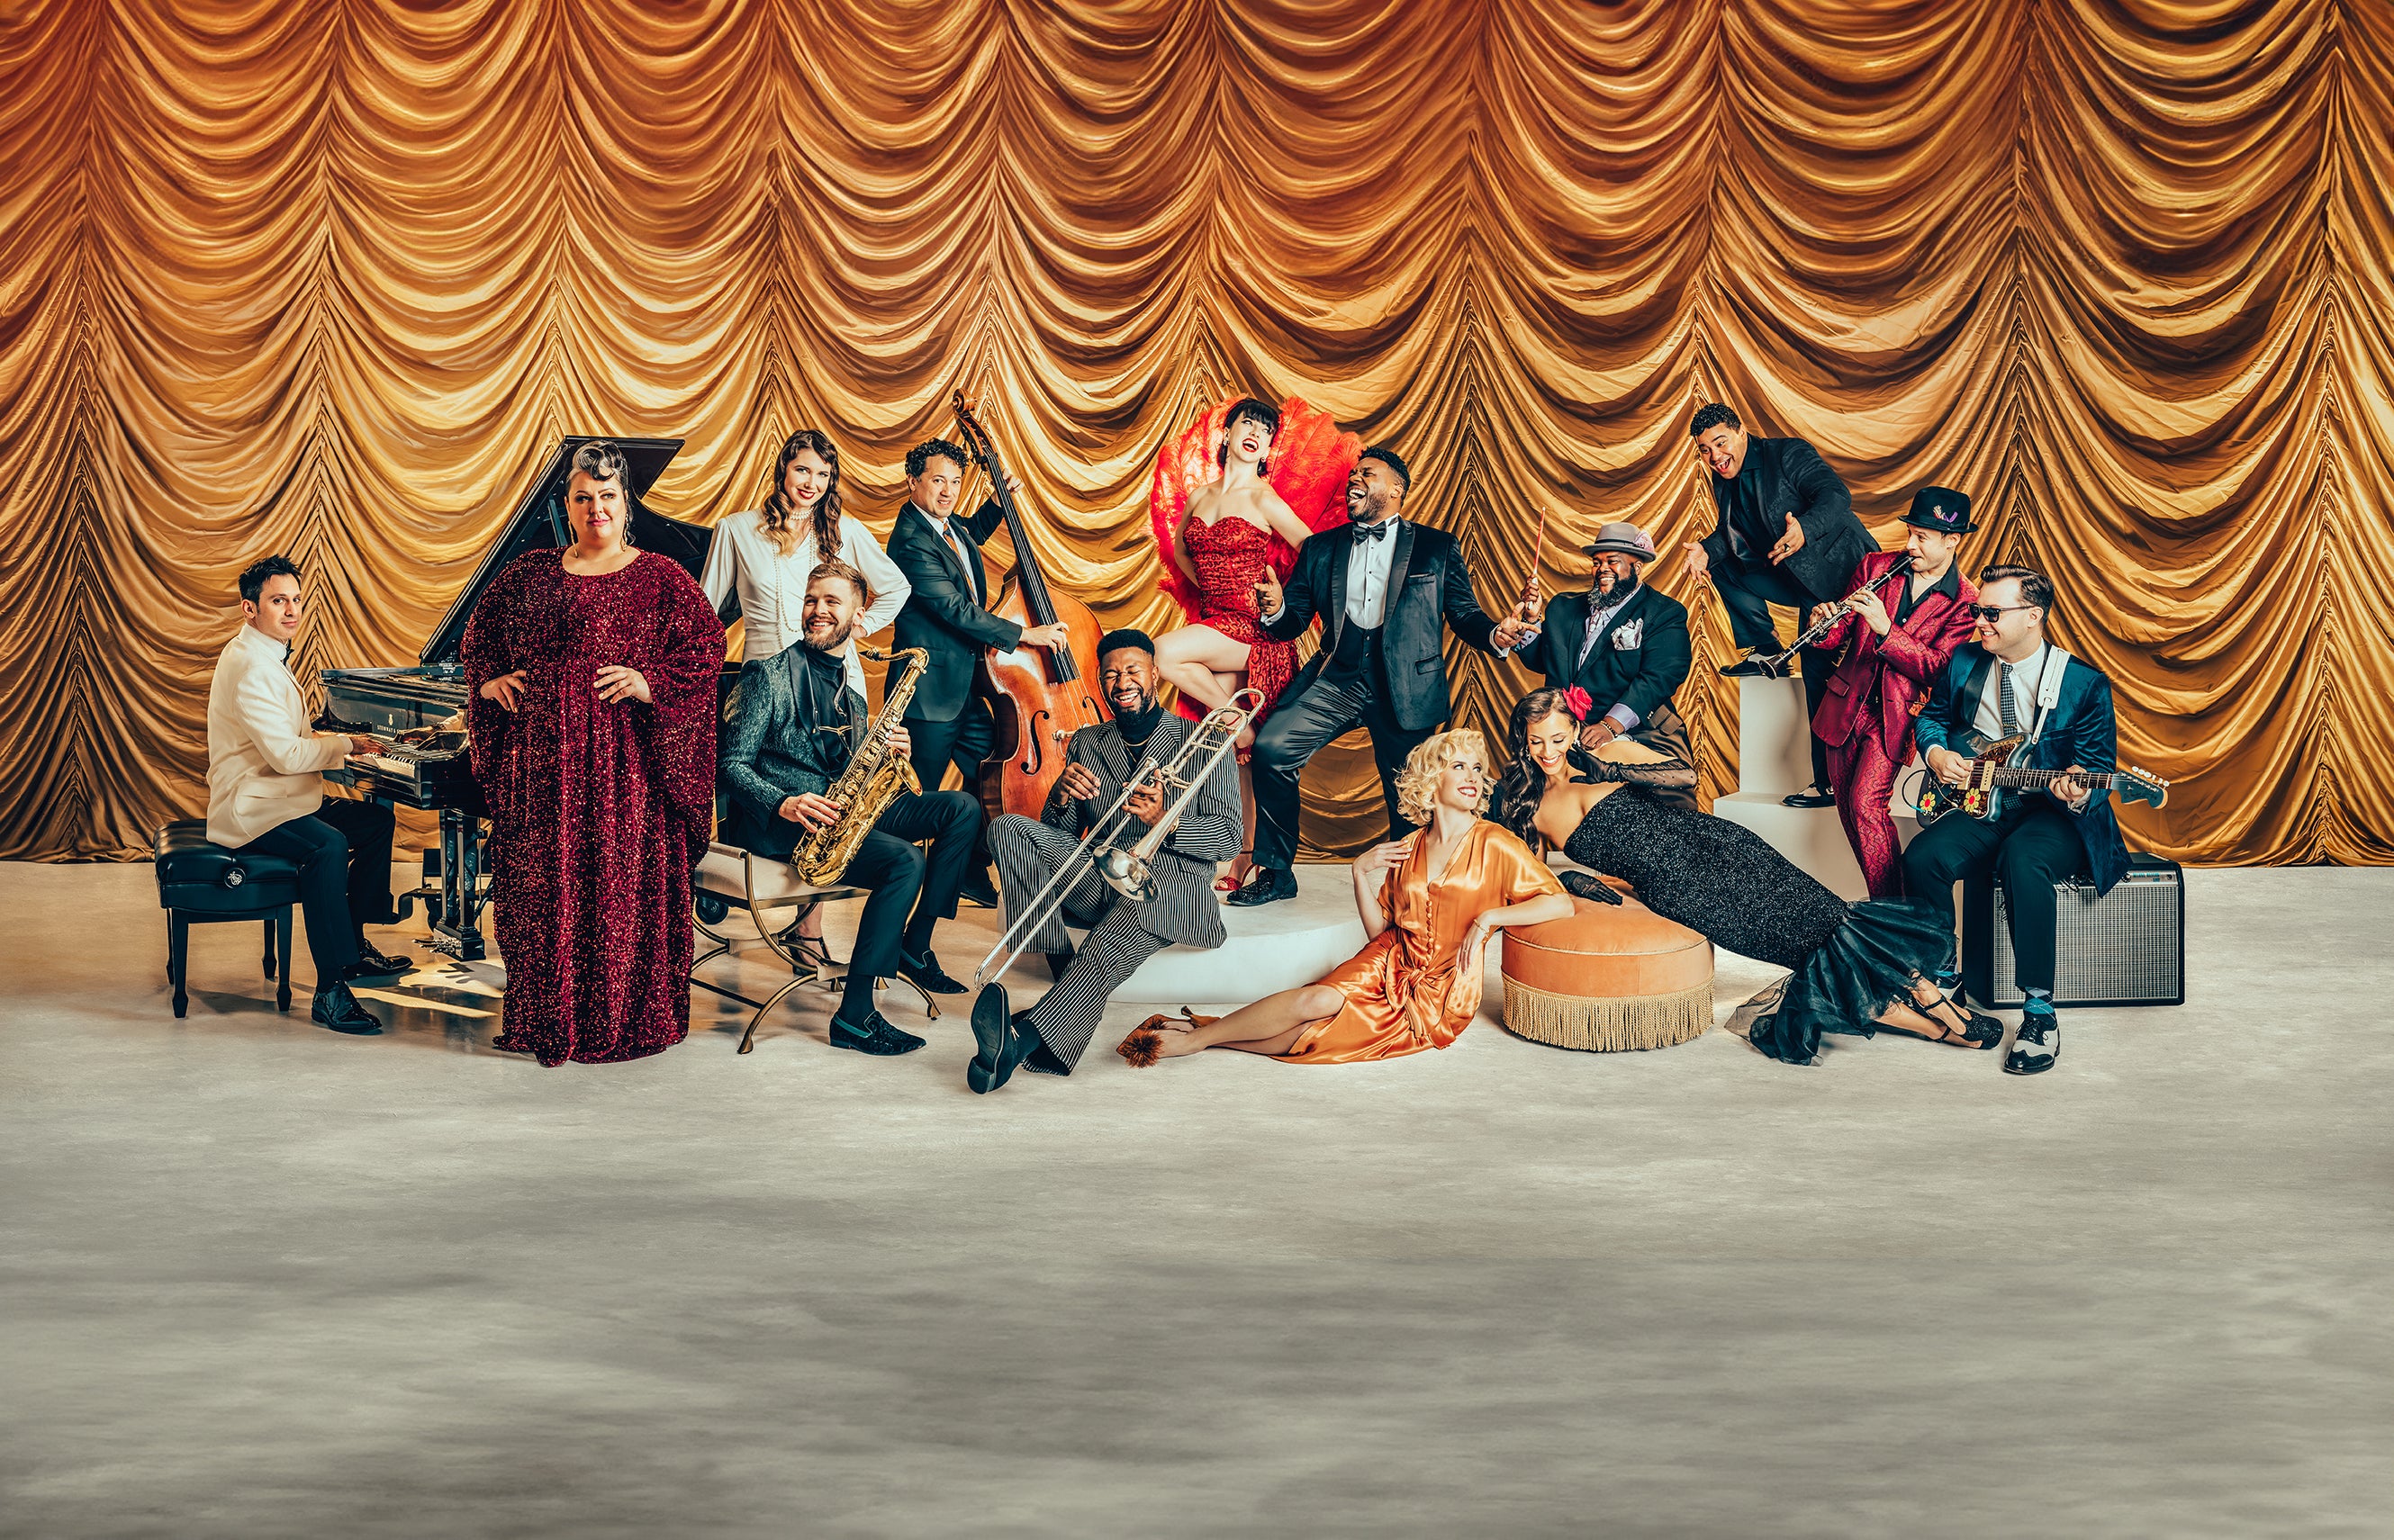 Postmodern Jukebox - The "10" Tour in Tysons promo photo for Offical Platinum Onsale presale offer code